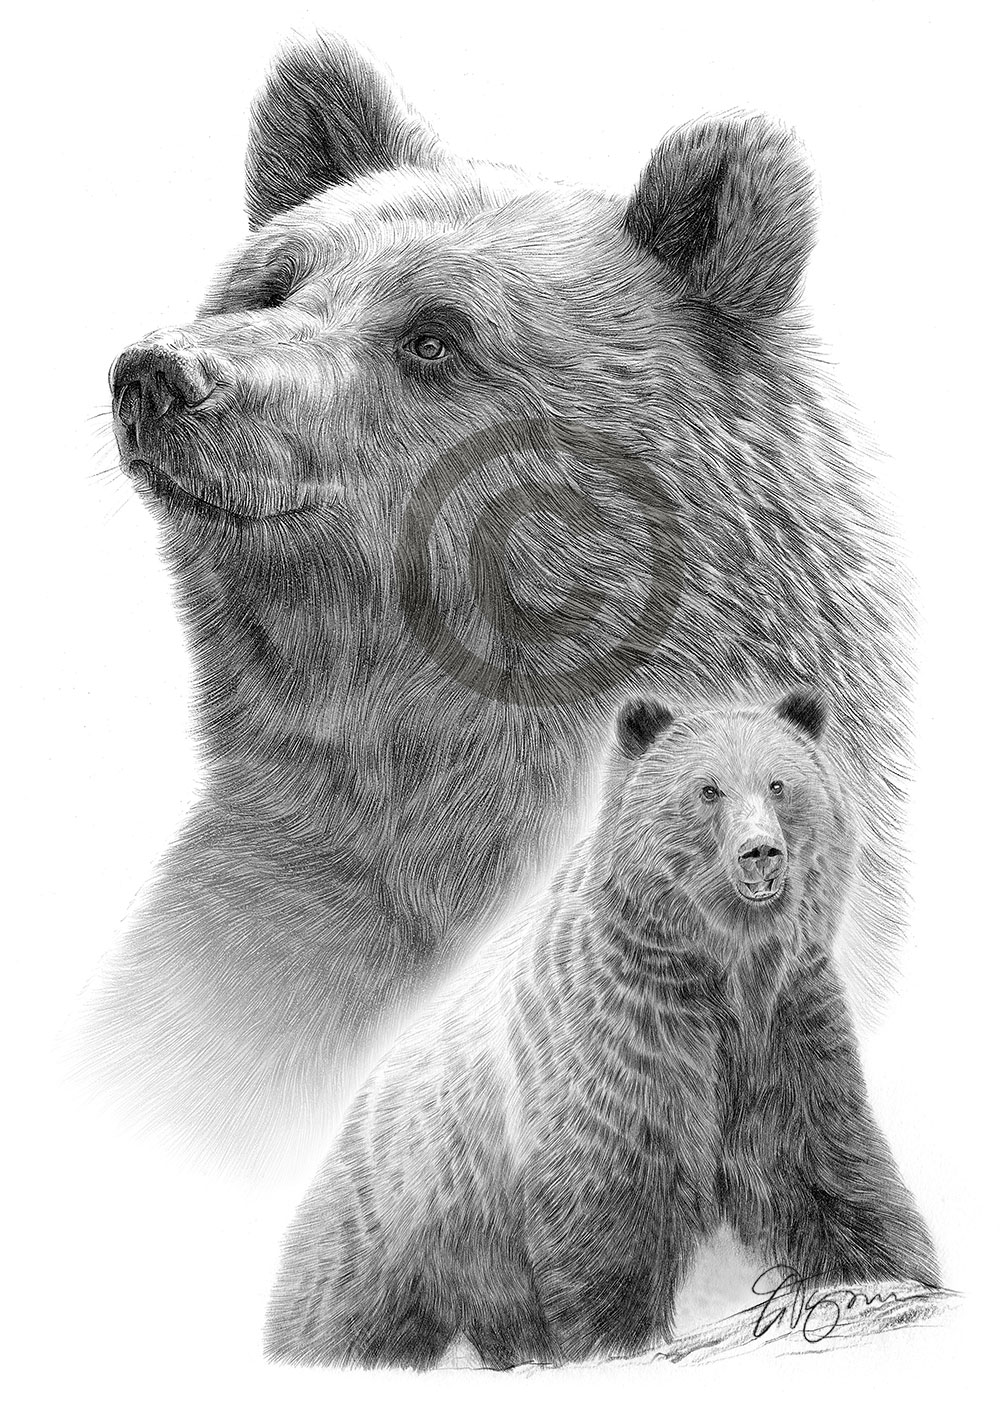 Pencil drawing of two grizzly bears by artist Gary Tymon